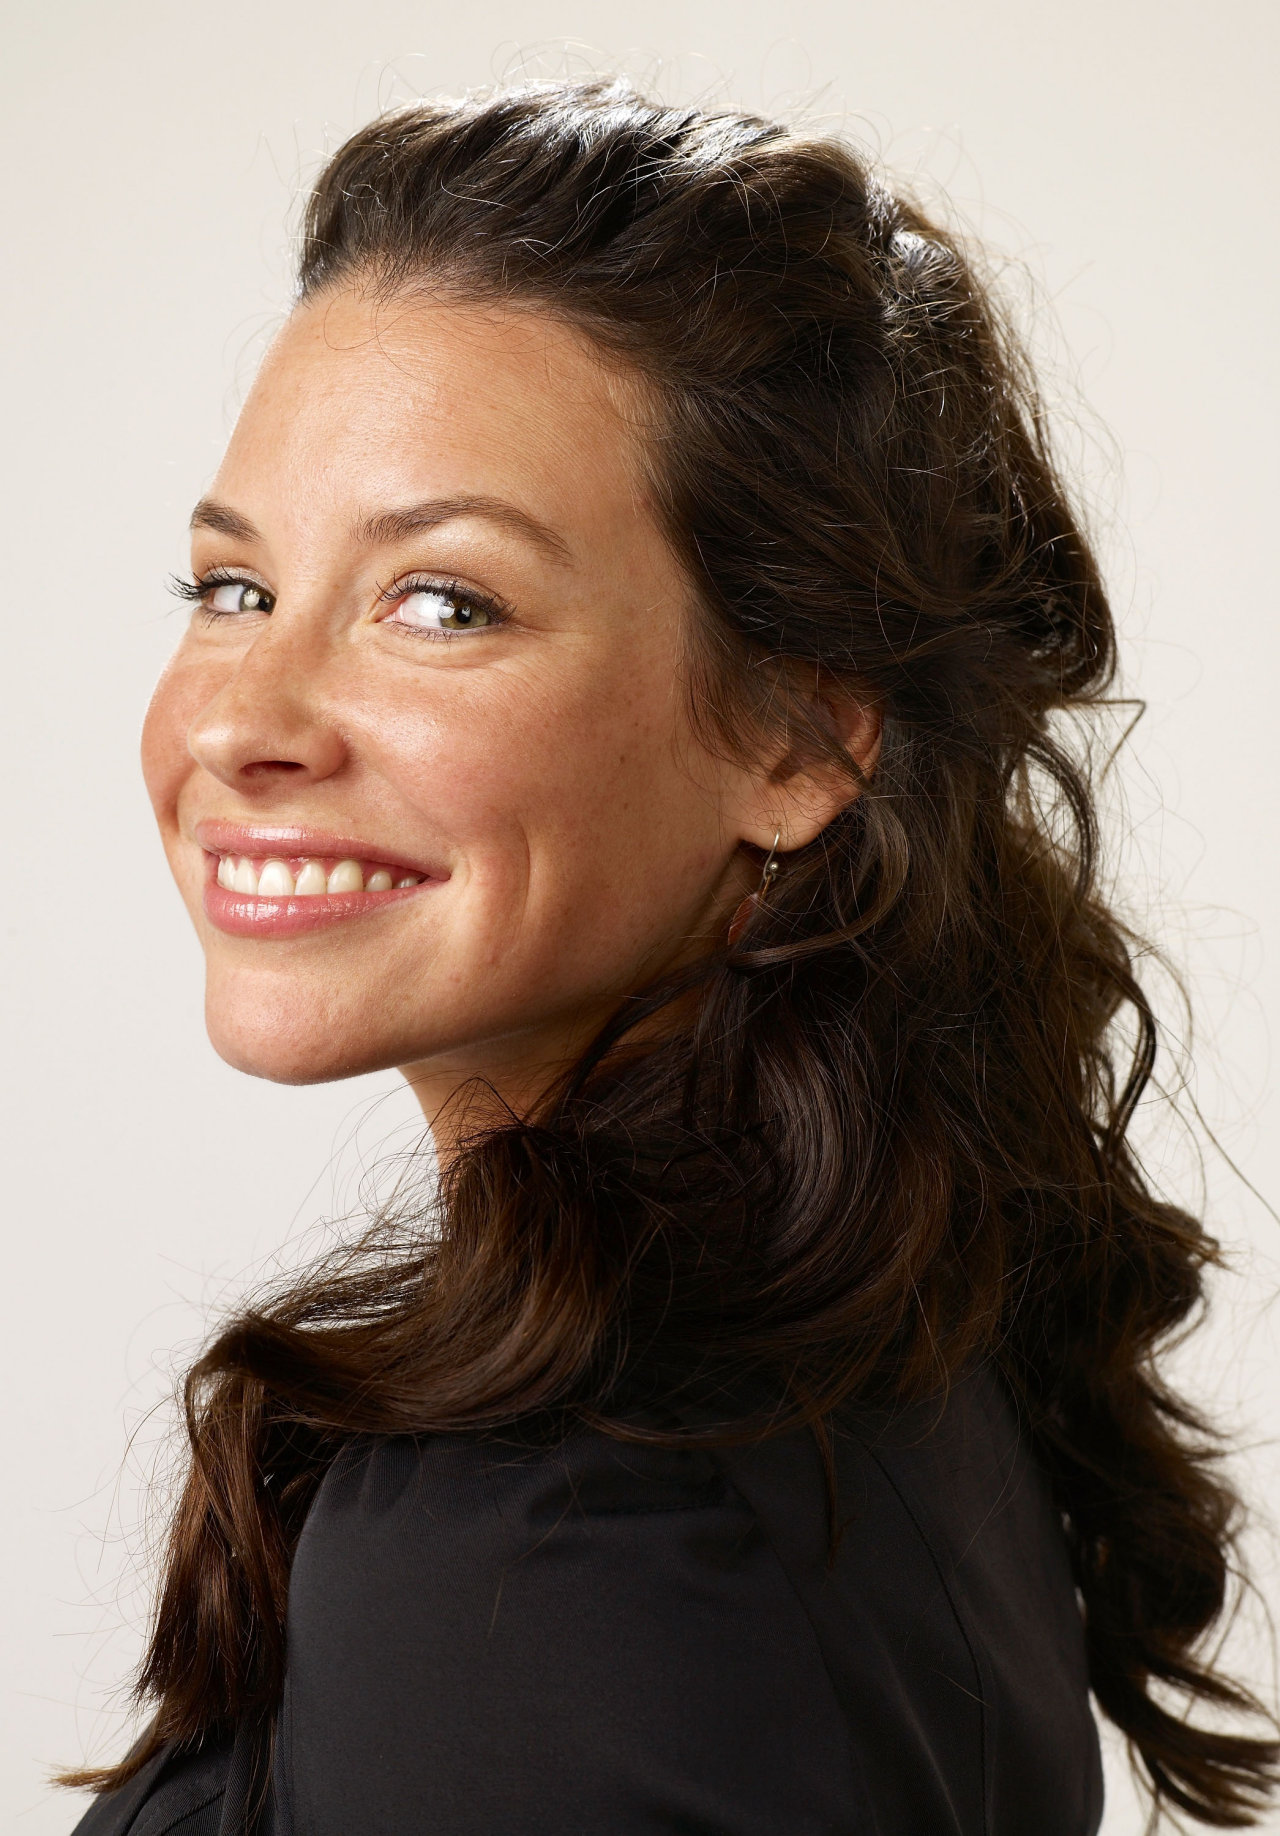 Evangeline Lilly leaked wallpapers